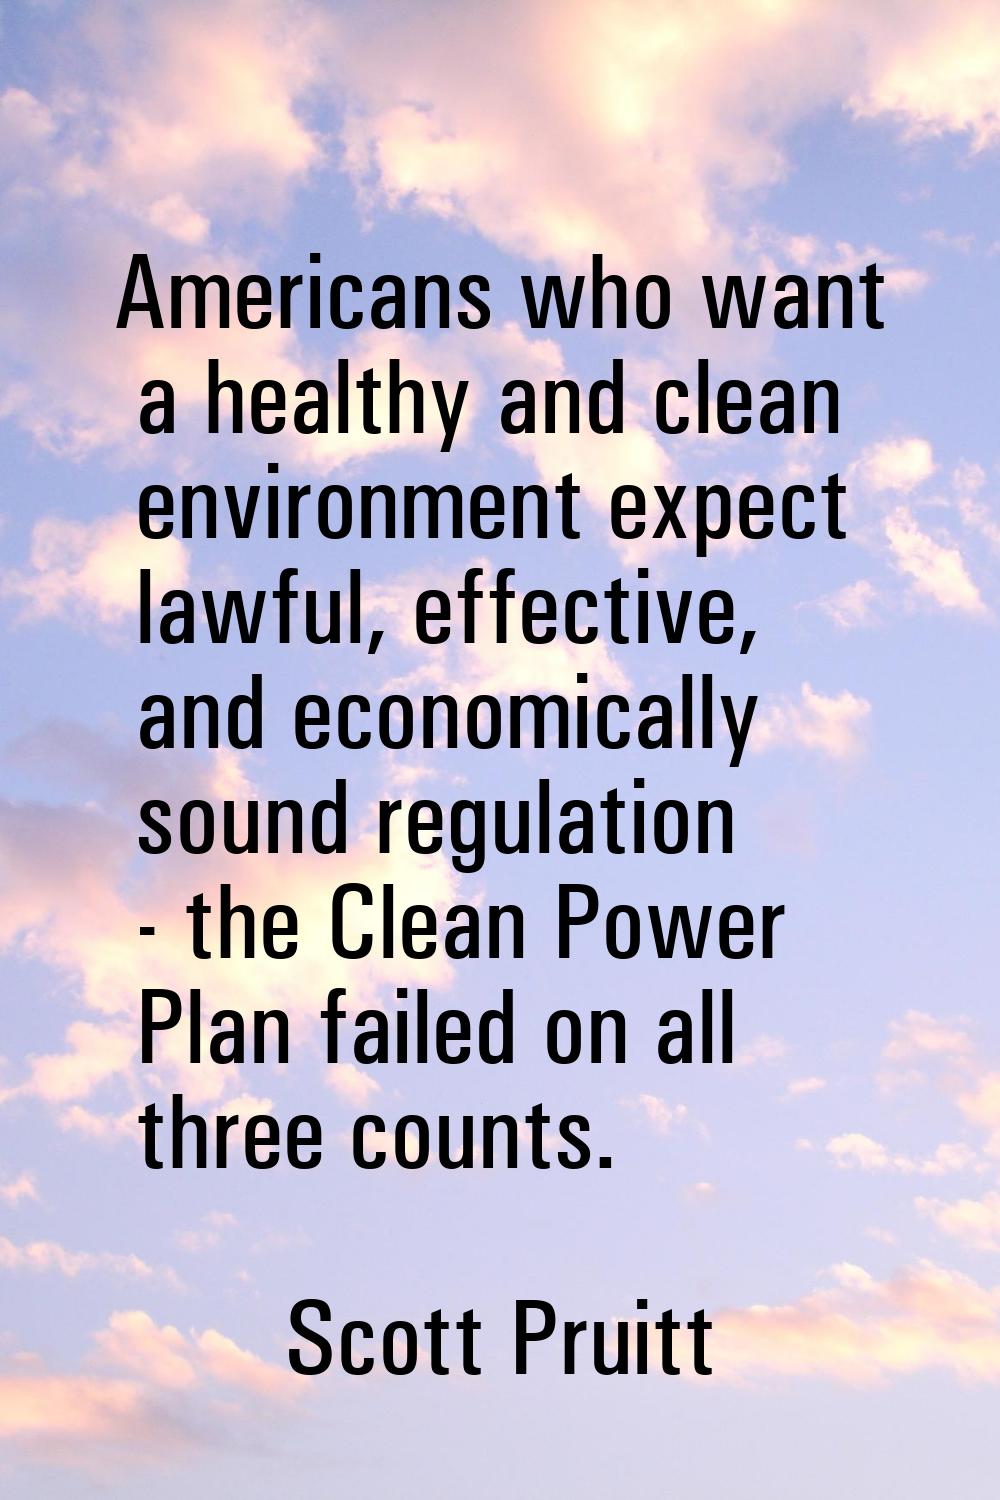 Americans who want a healthy and clean environment expect lawful, effective, and economically sound